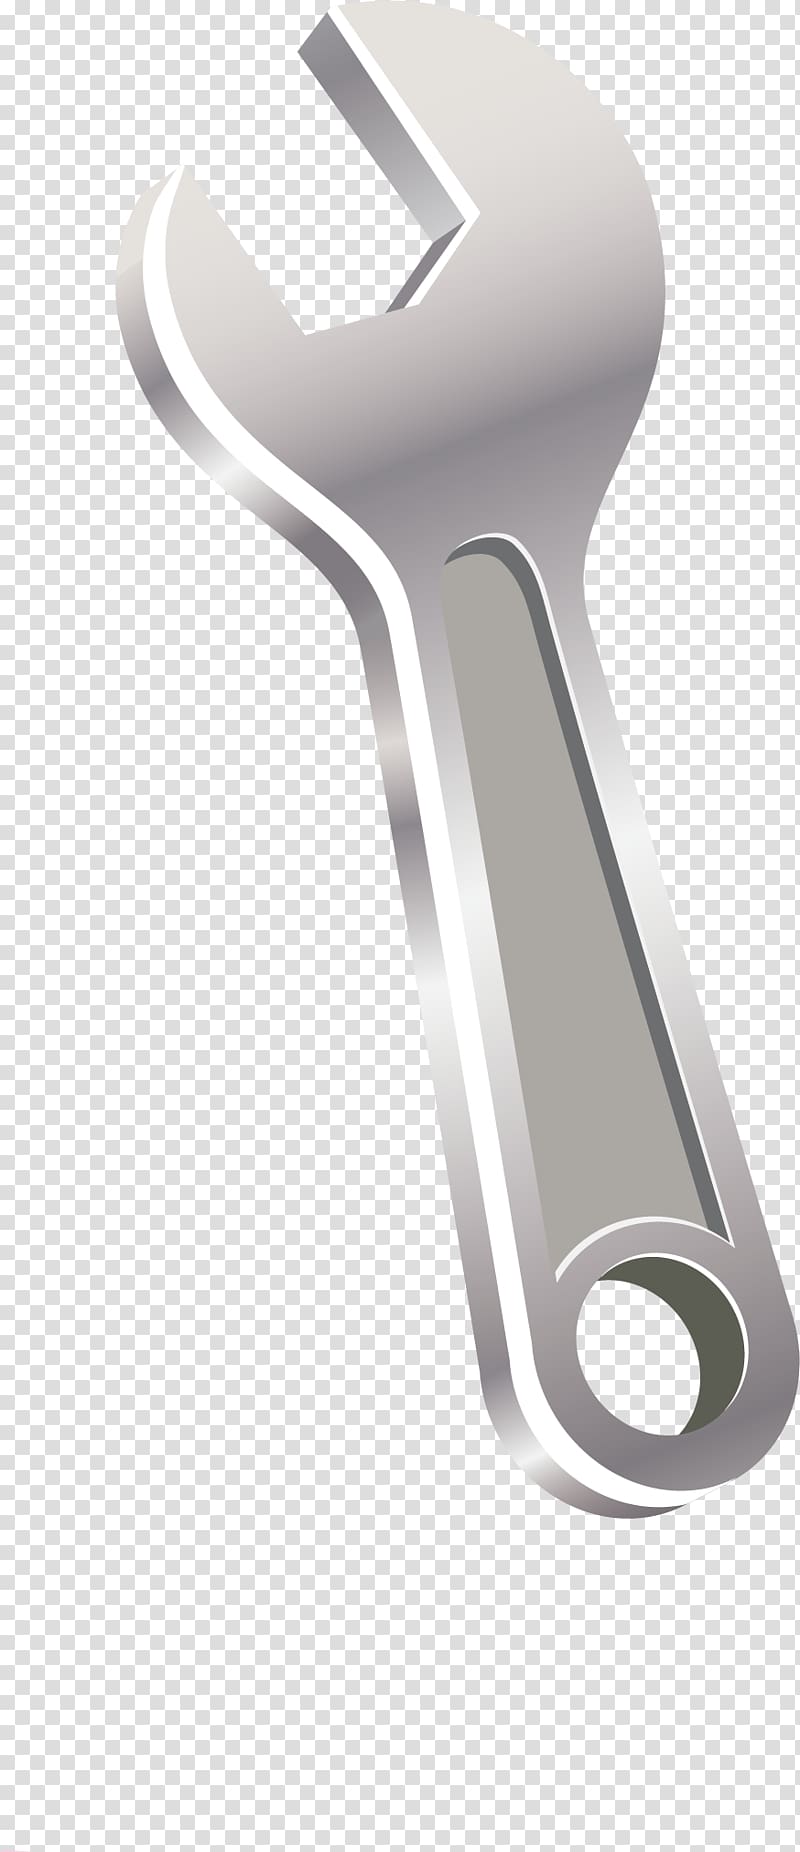 Wrench Adobe Illustrator, Wrench material transparent background PNG clipart